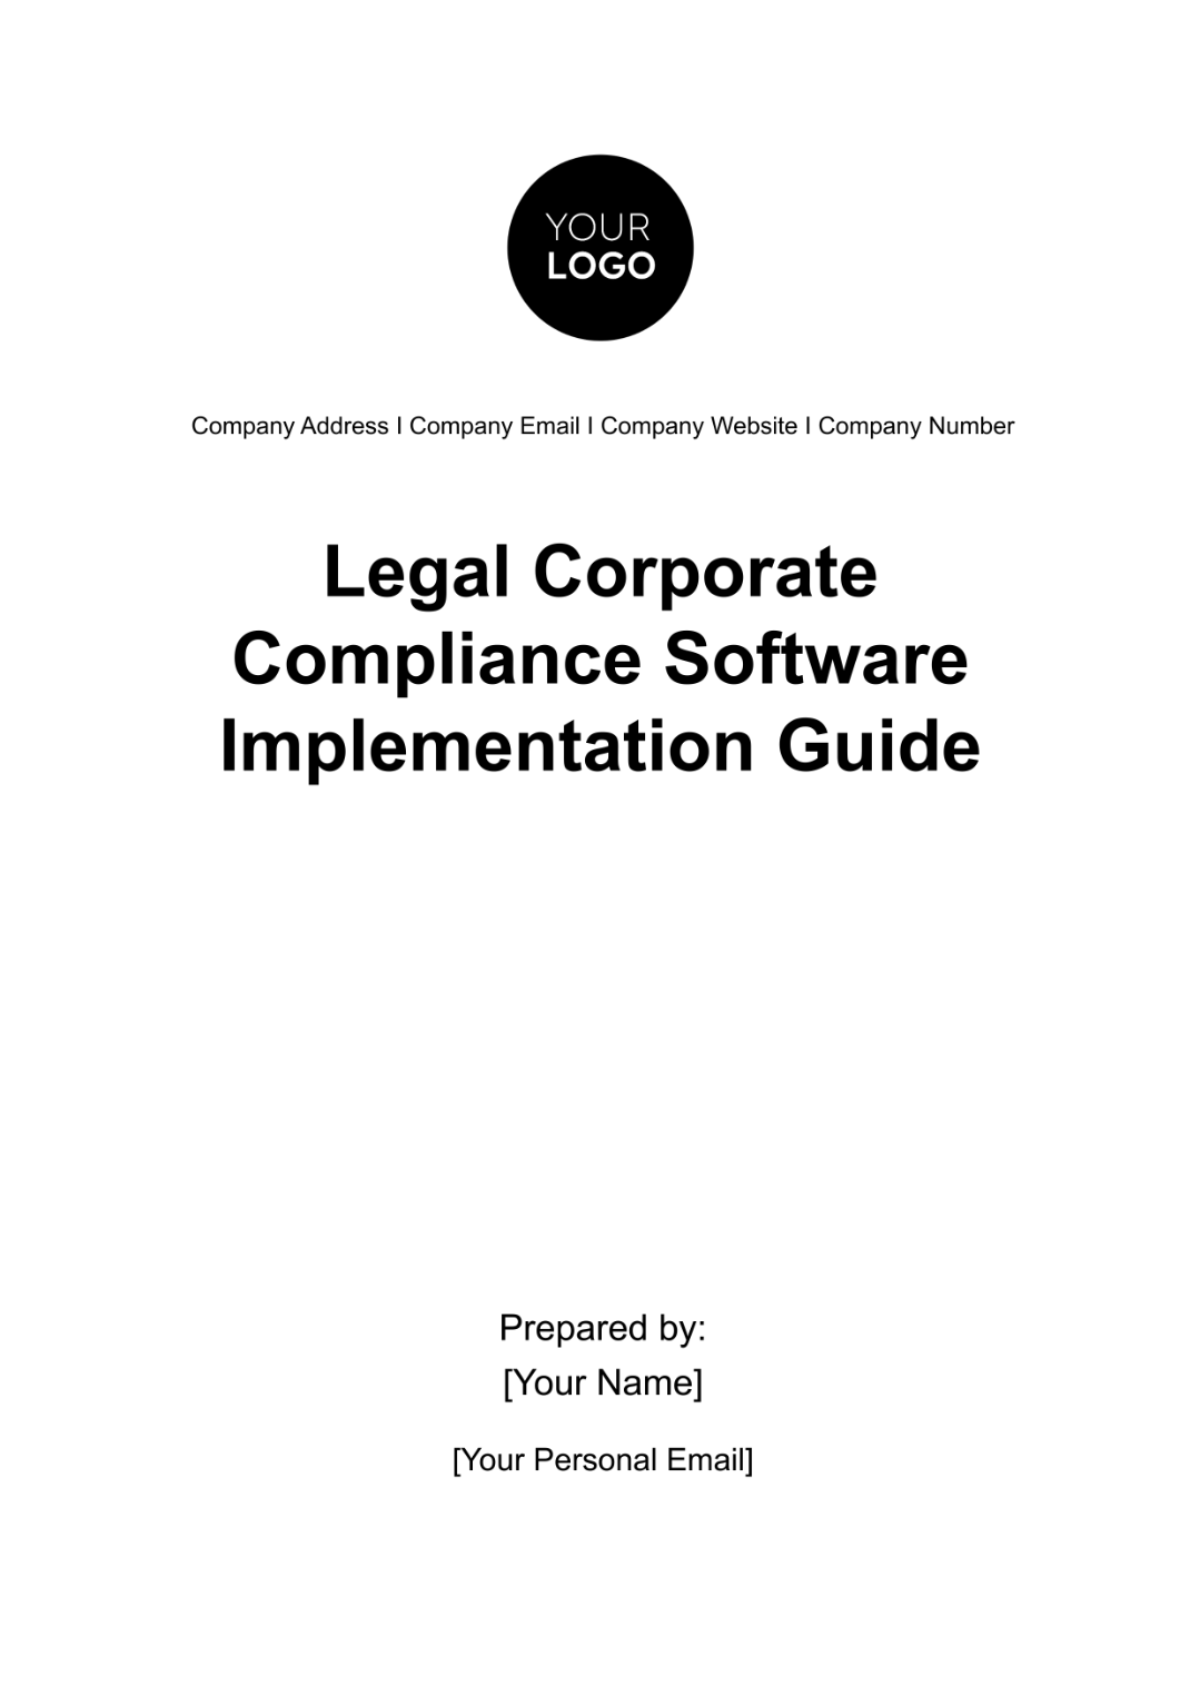 Legal Corporate Compliance Software Implementation Guide Template